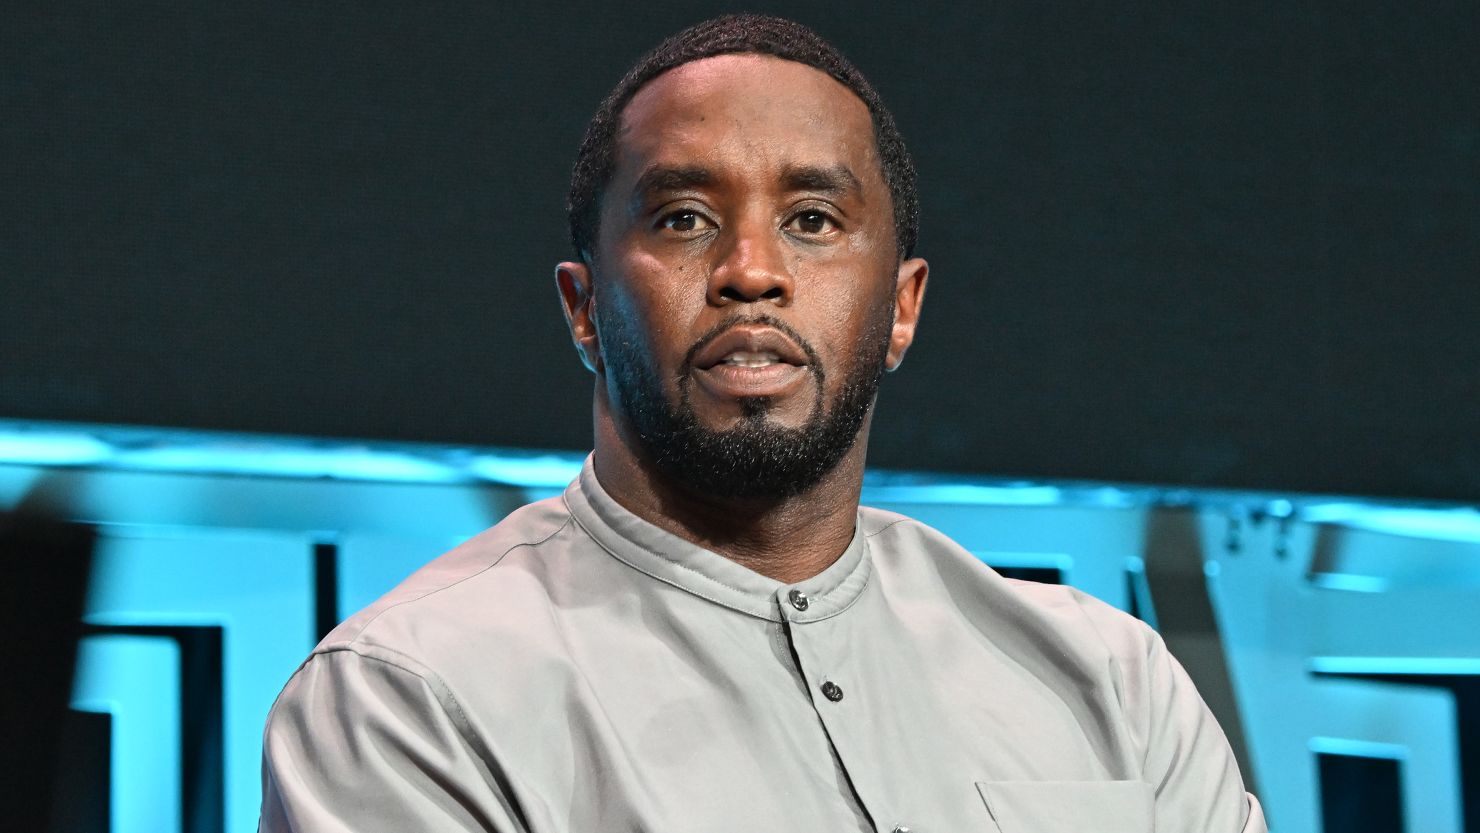 ATLANTA, GEORGIA - AUGUST 26: Sean "Diddy" Combs attends Day 1 of 2023 Invest Fest at Georgia World Congress Center on August 26, 2023 in Atlanta, Georgia. (Photo by Paras Griffin/Getty Images)